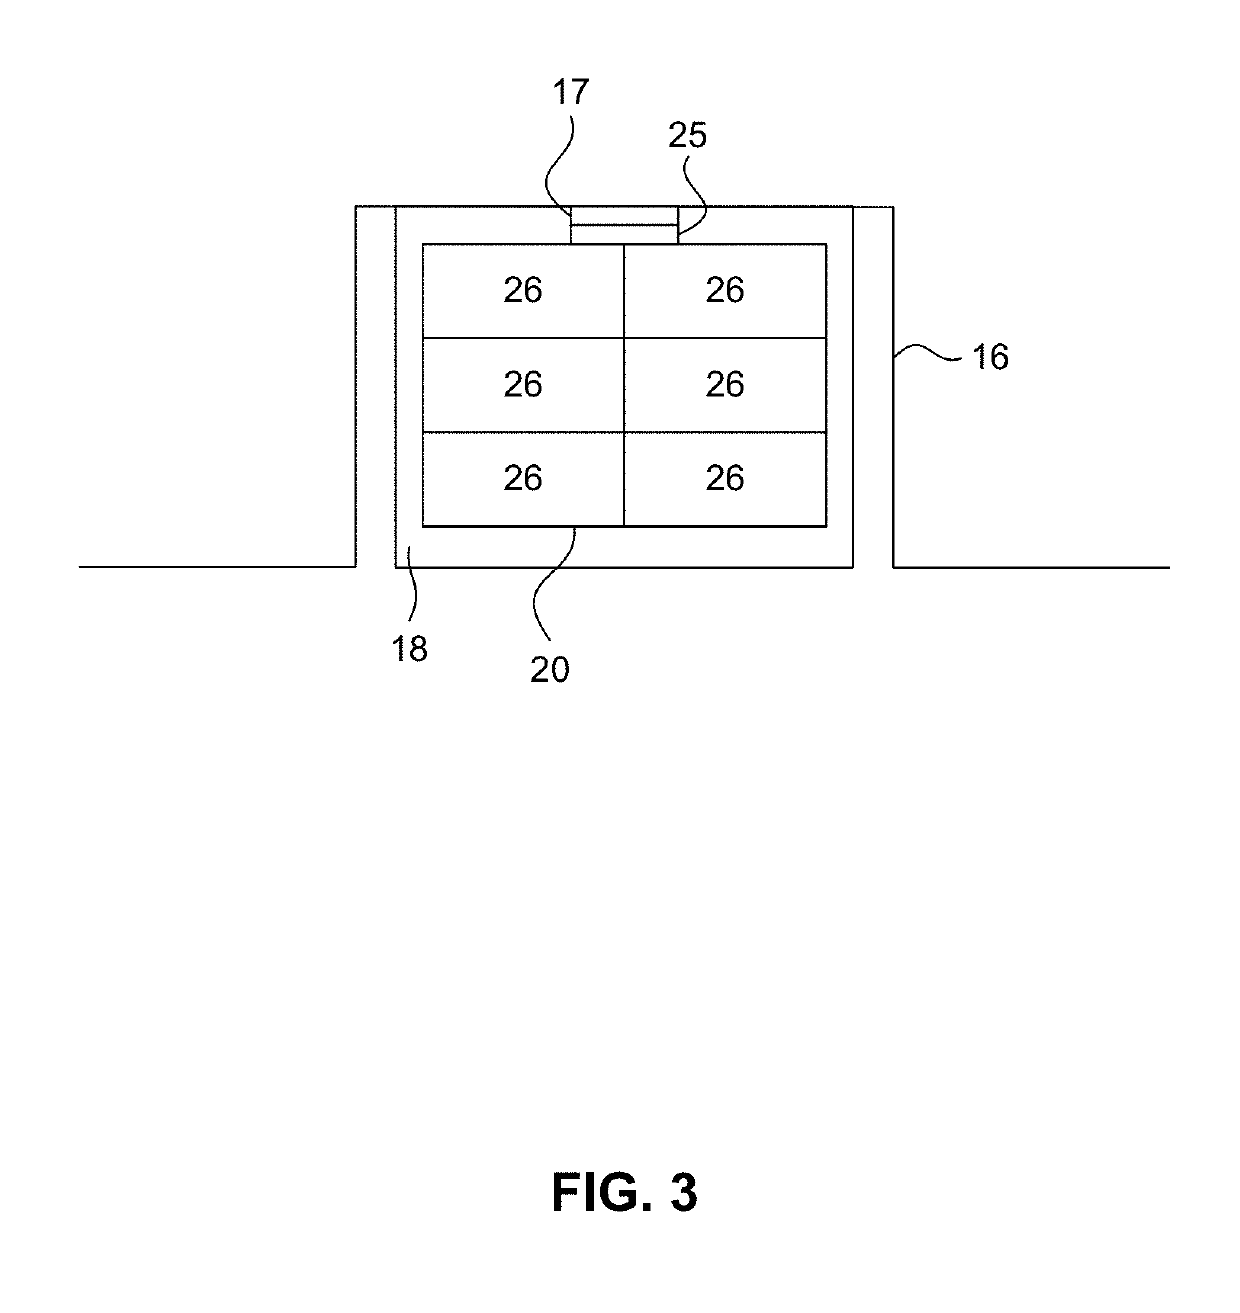 Autonomous food product delivery vehicle system and method